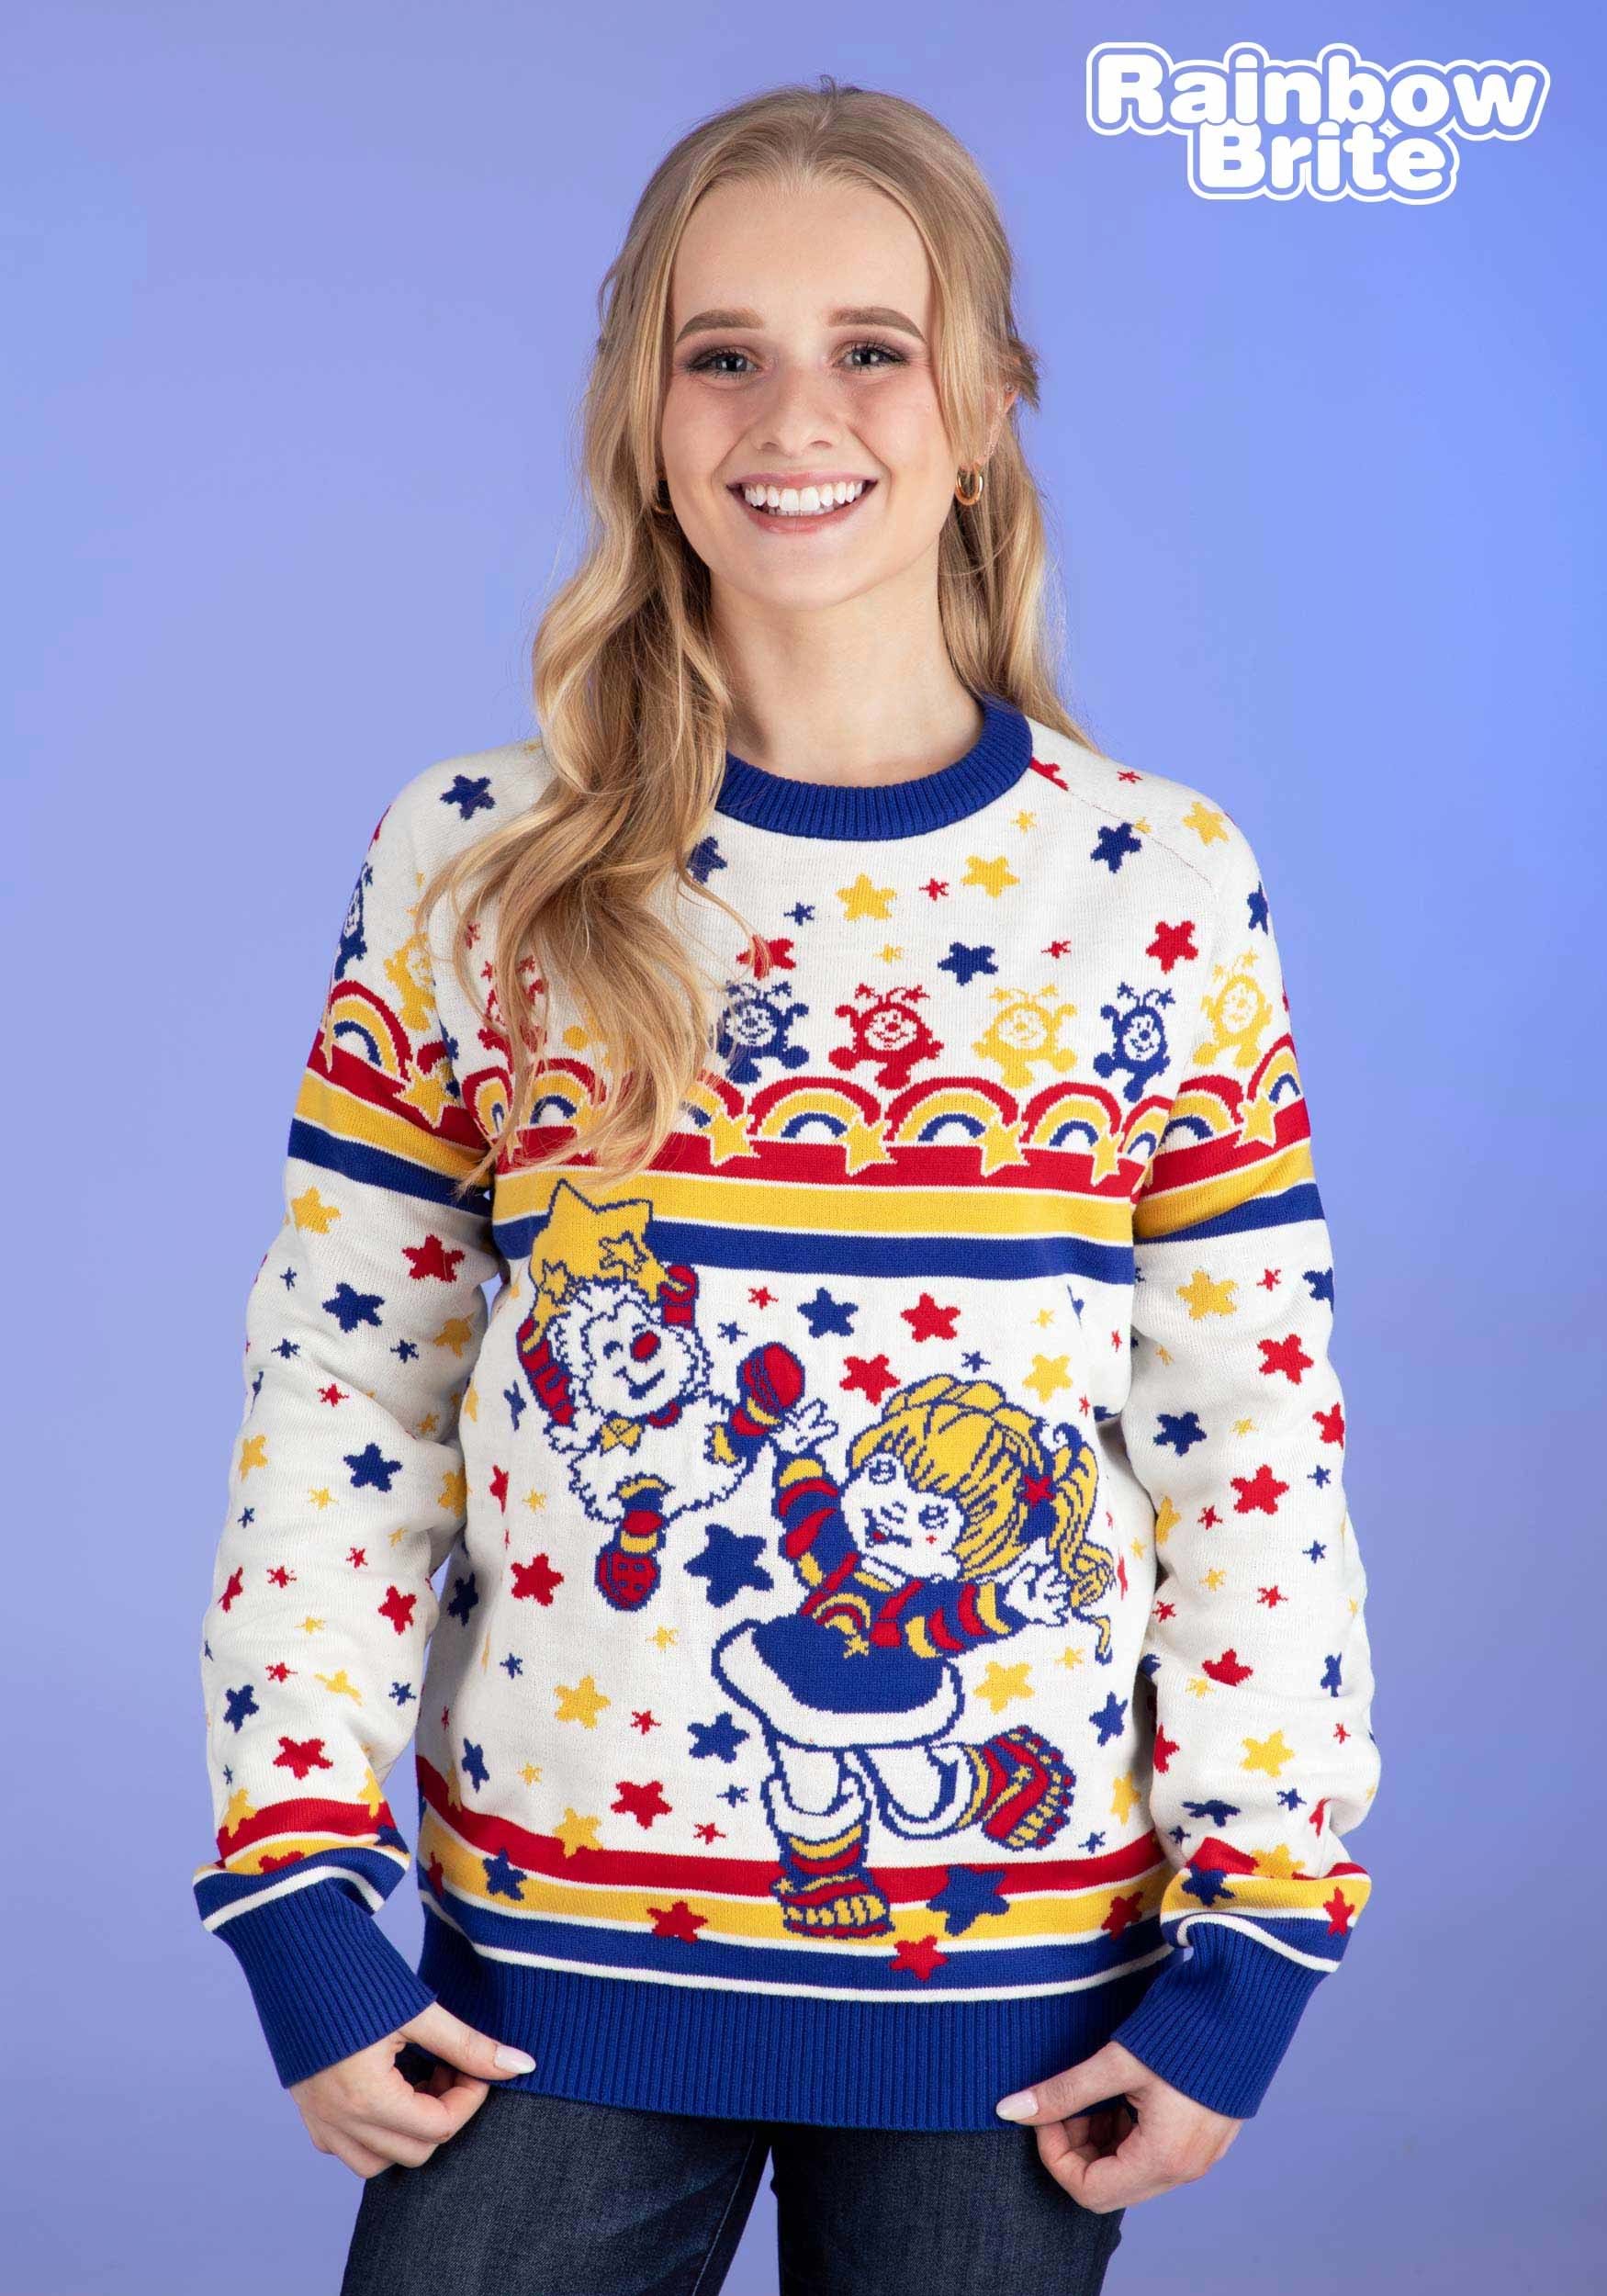 https://images.halloweencostumes.ca/products/46369/1-1/classic-rainbow-brite-adult-ugly-christmas-sweater-0.jpg